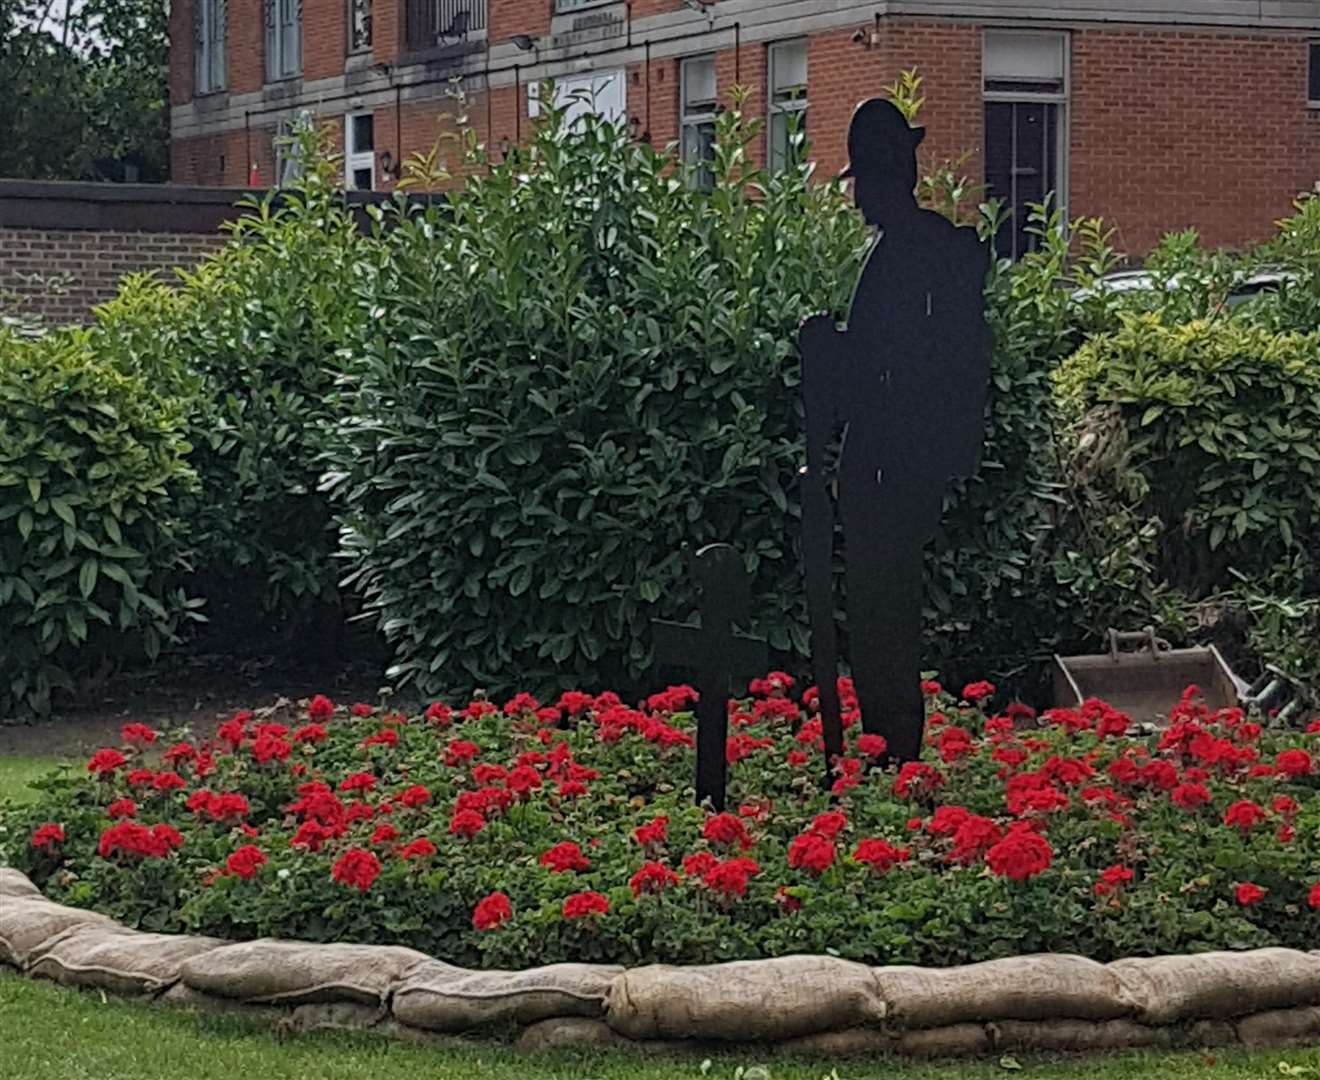 The eye-catching silhouette sculptures were unveiled in June